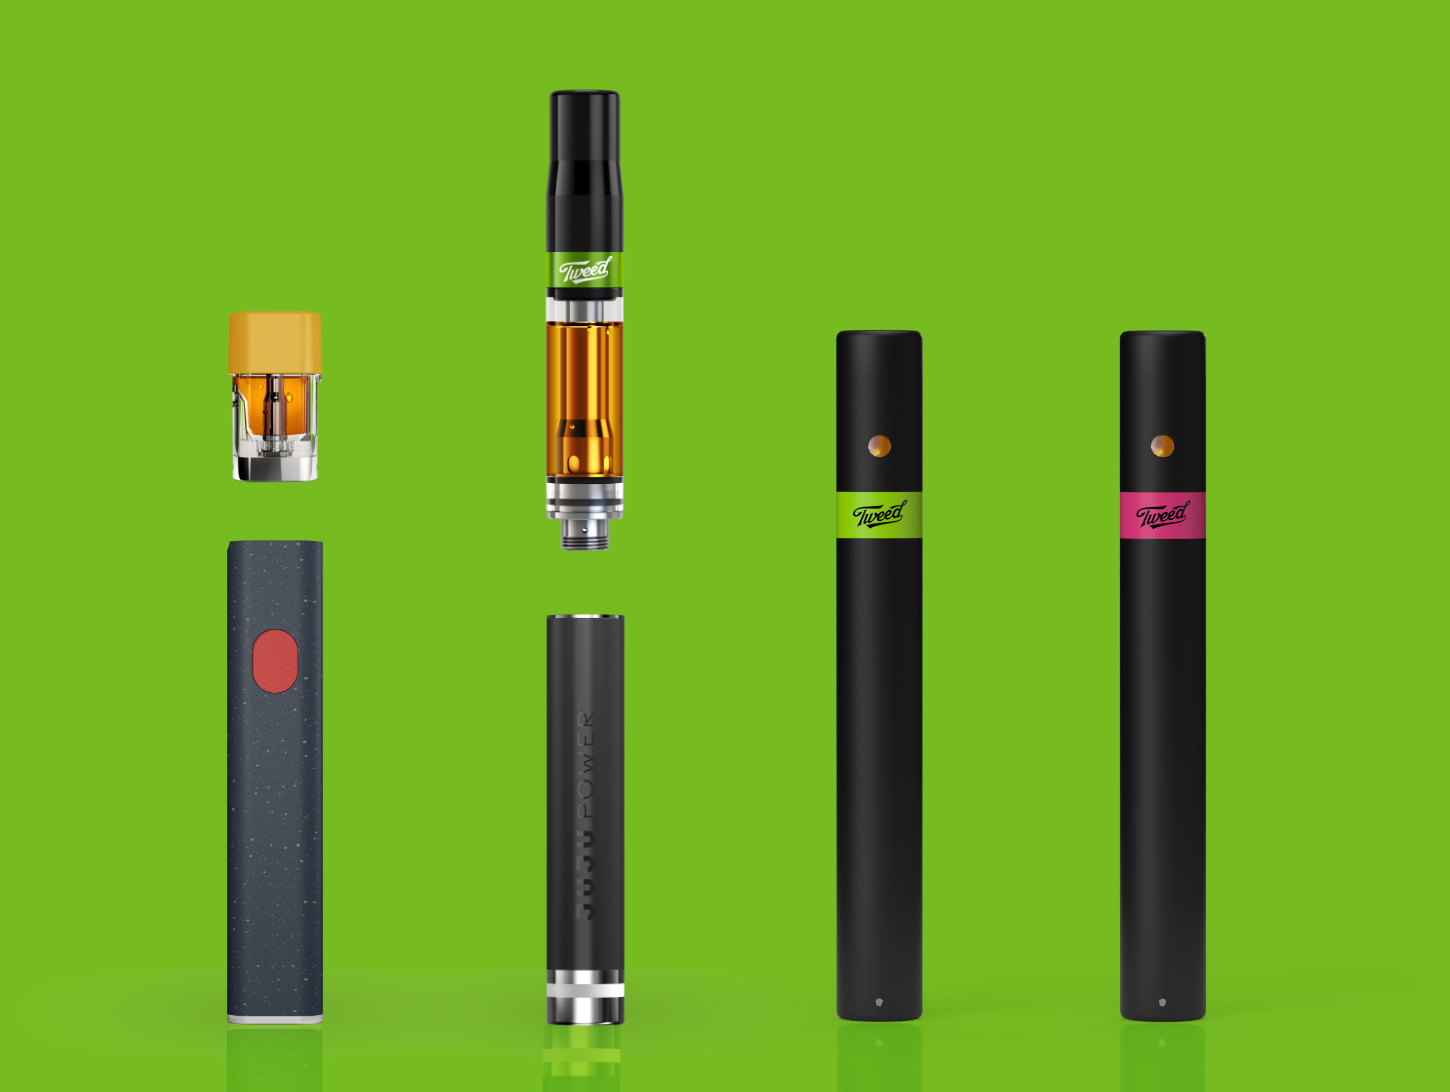 510 vapes, pax vaporizer, and disposable vapes available at the 6ix cannabis store in ajax.